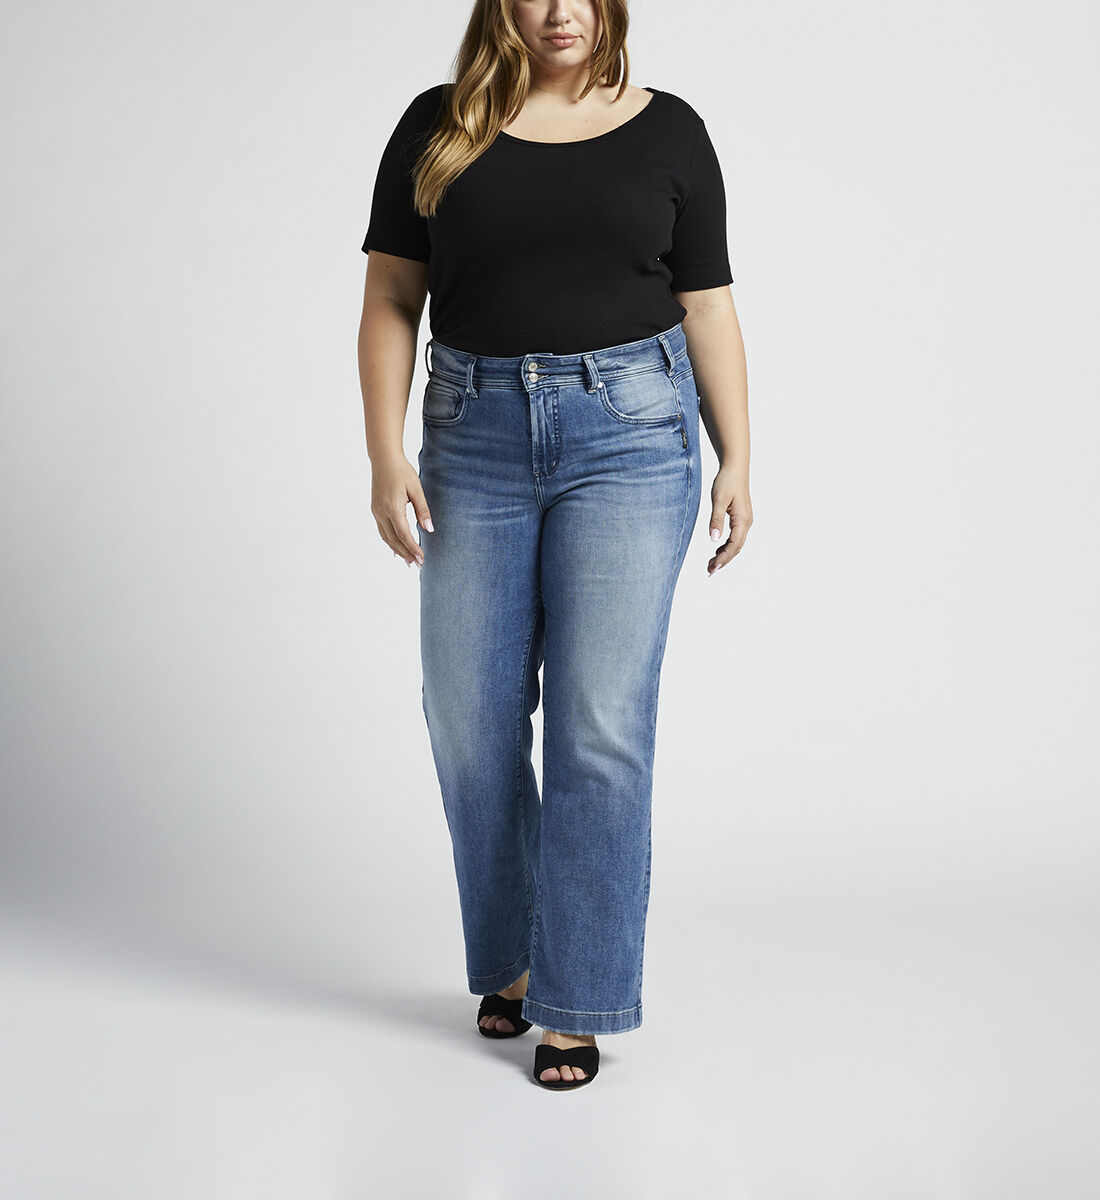 Avery High Rise Trouser Leg Jeans Plus Size Front